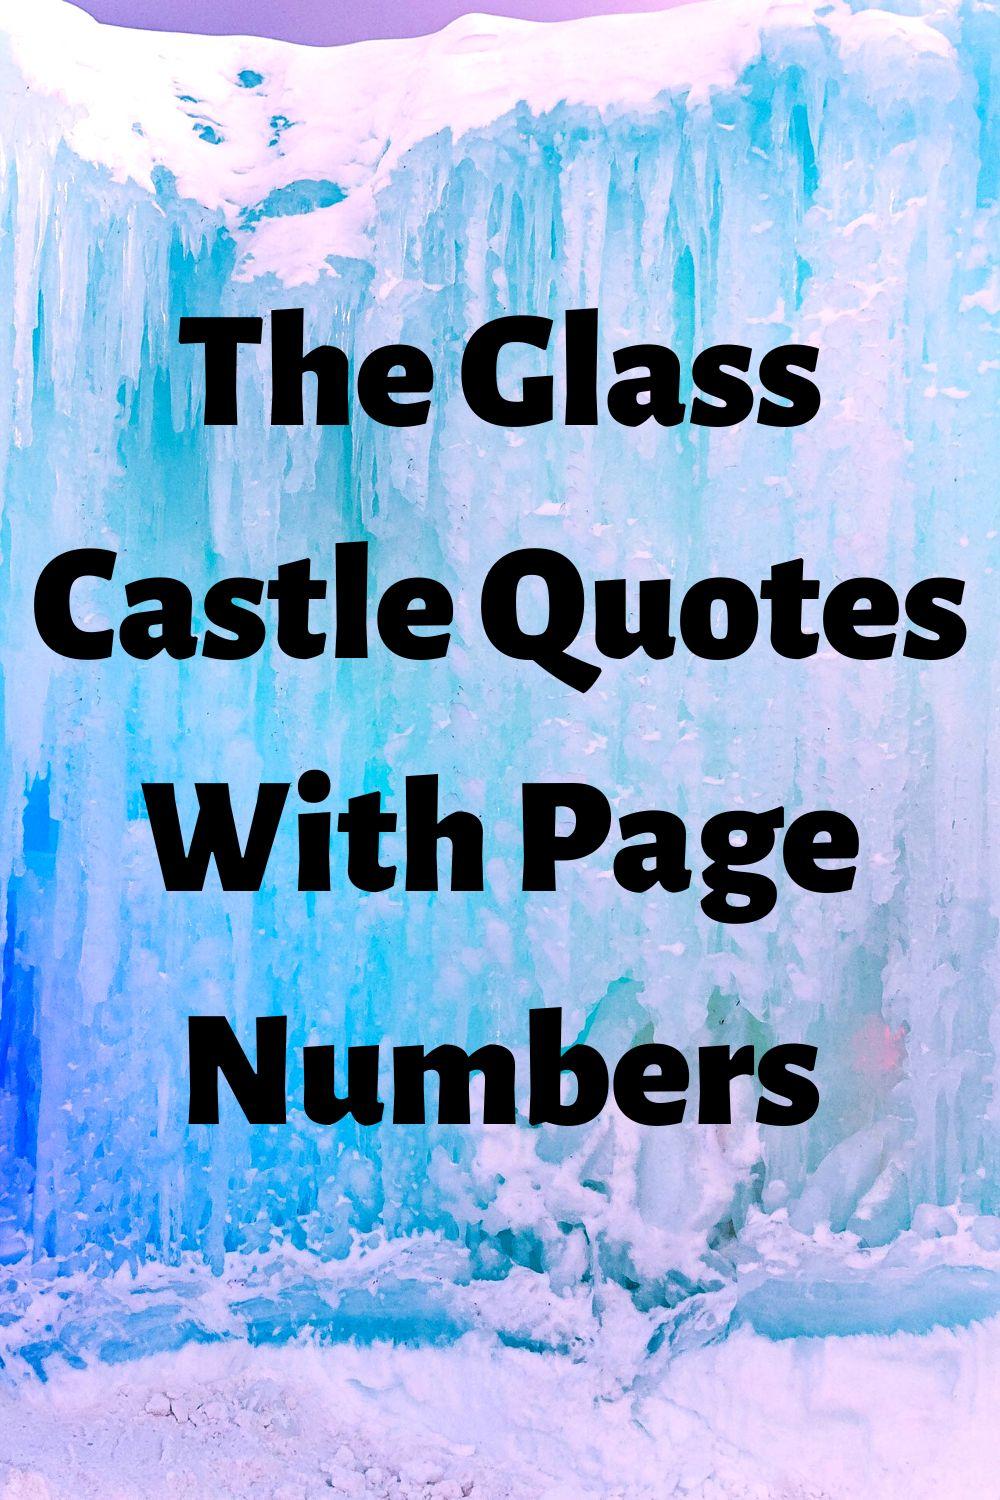 The Glass Castle Quotes With Page Numbers 